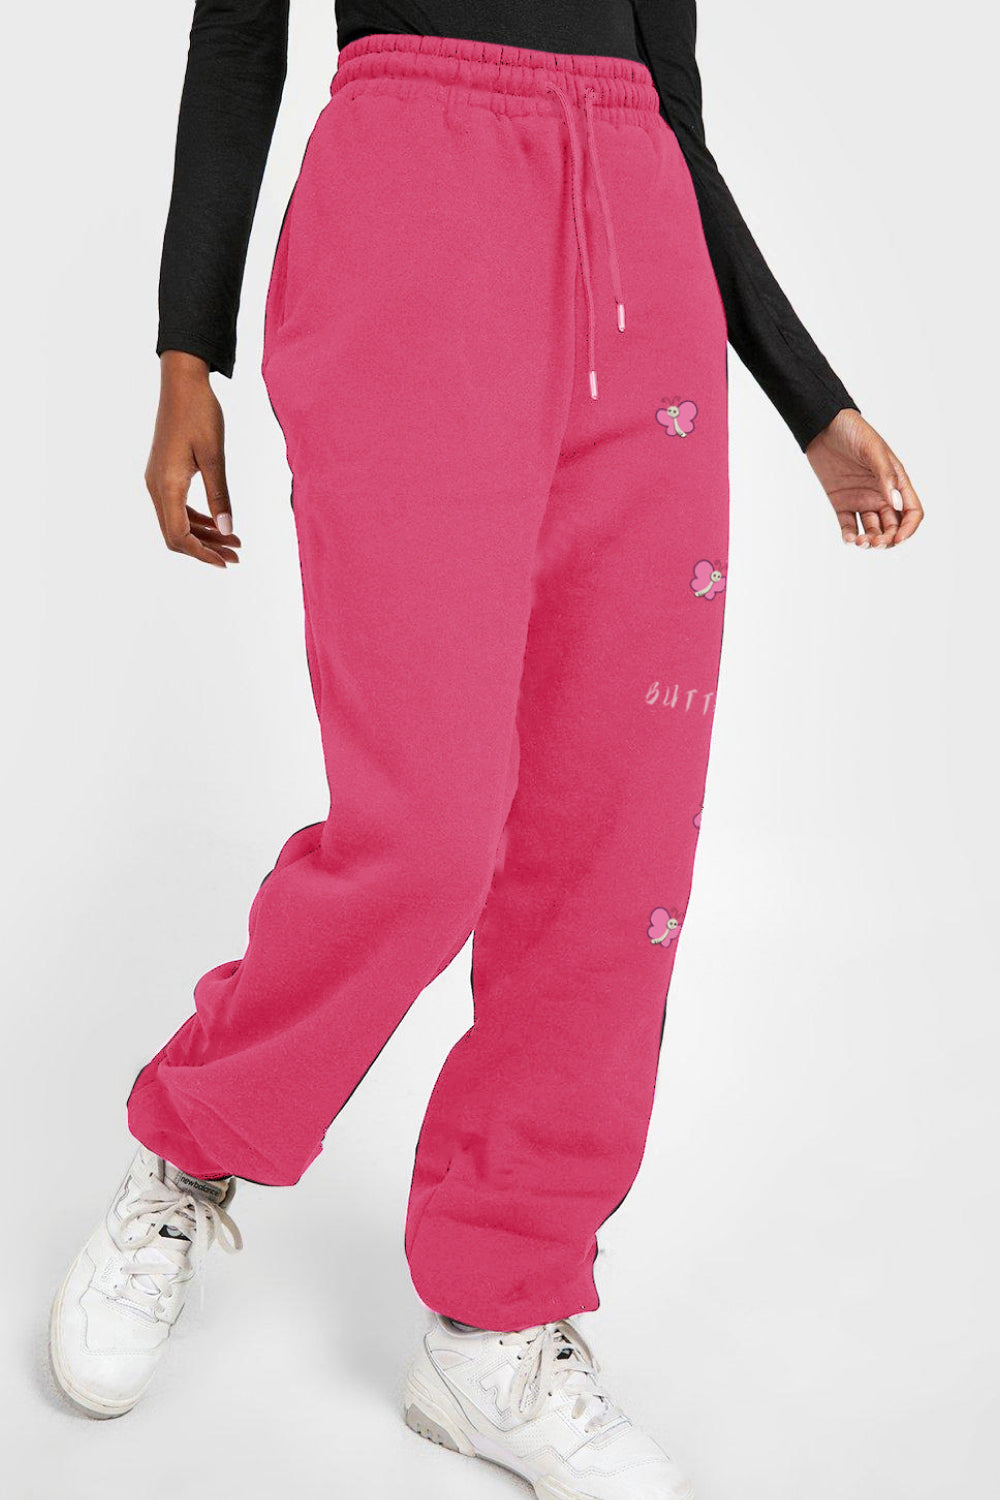 Simply Love Simply Love Full Size Drawstring BUTTERFLY Graphic Long Sweatpants